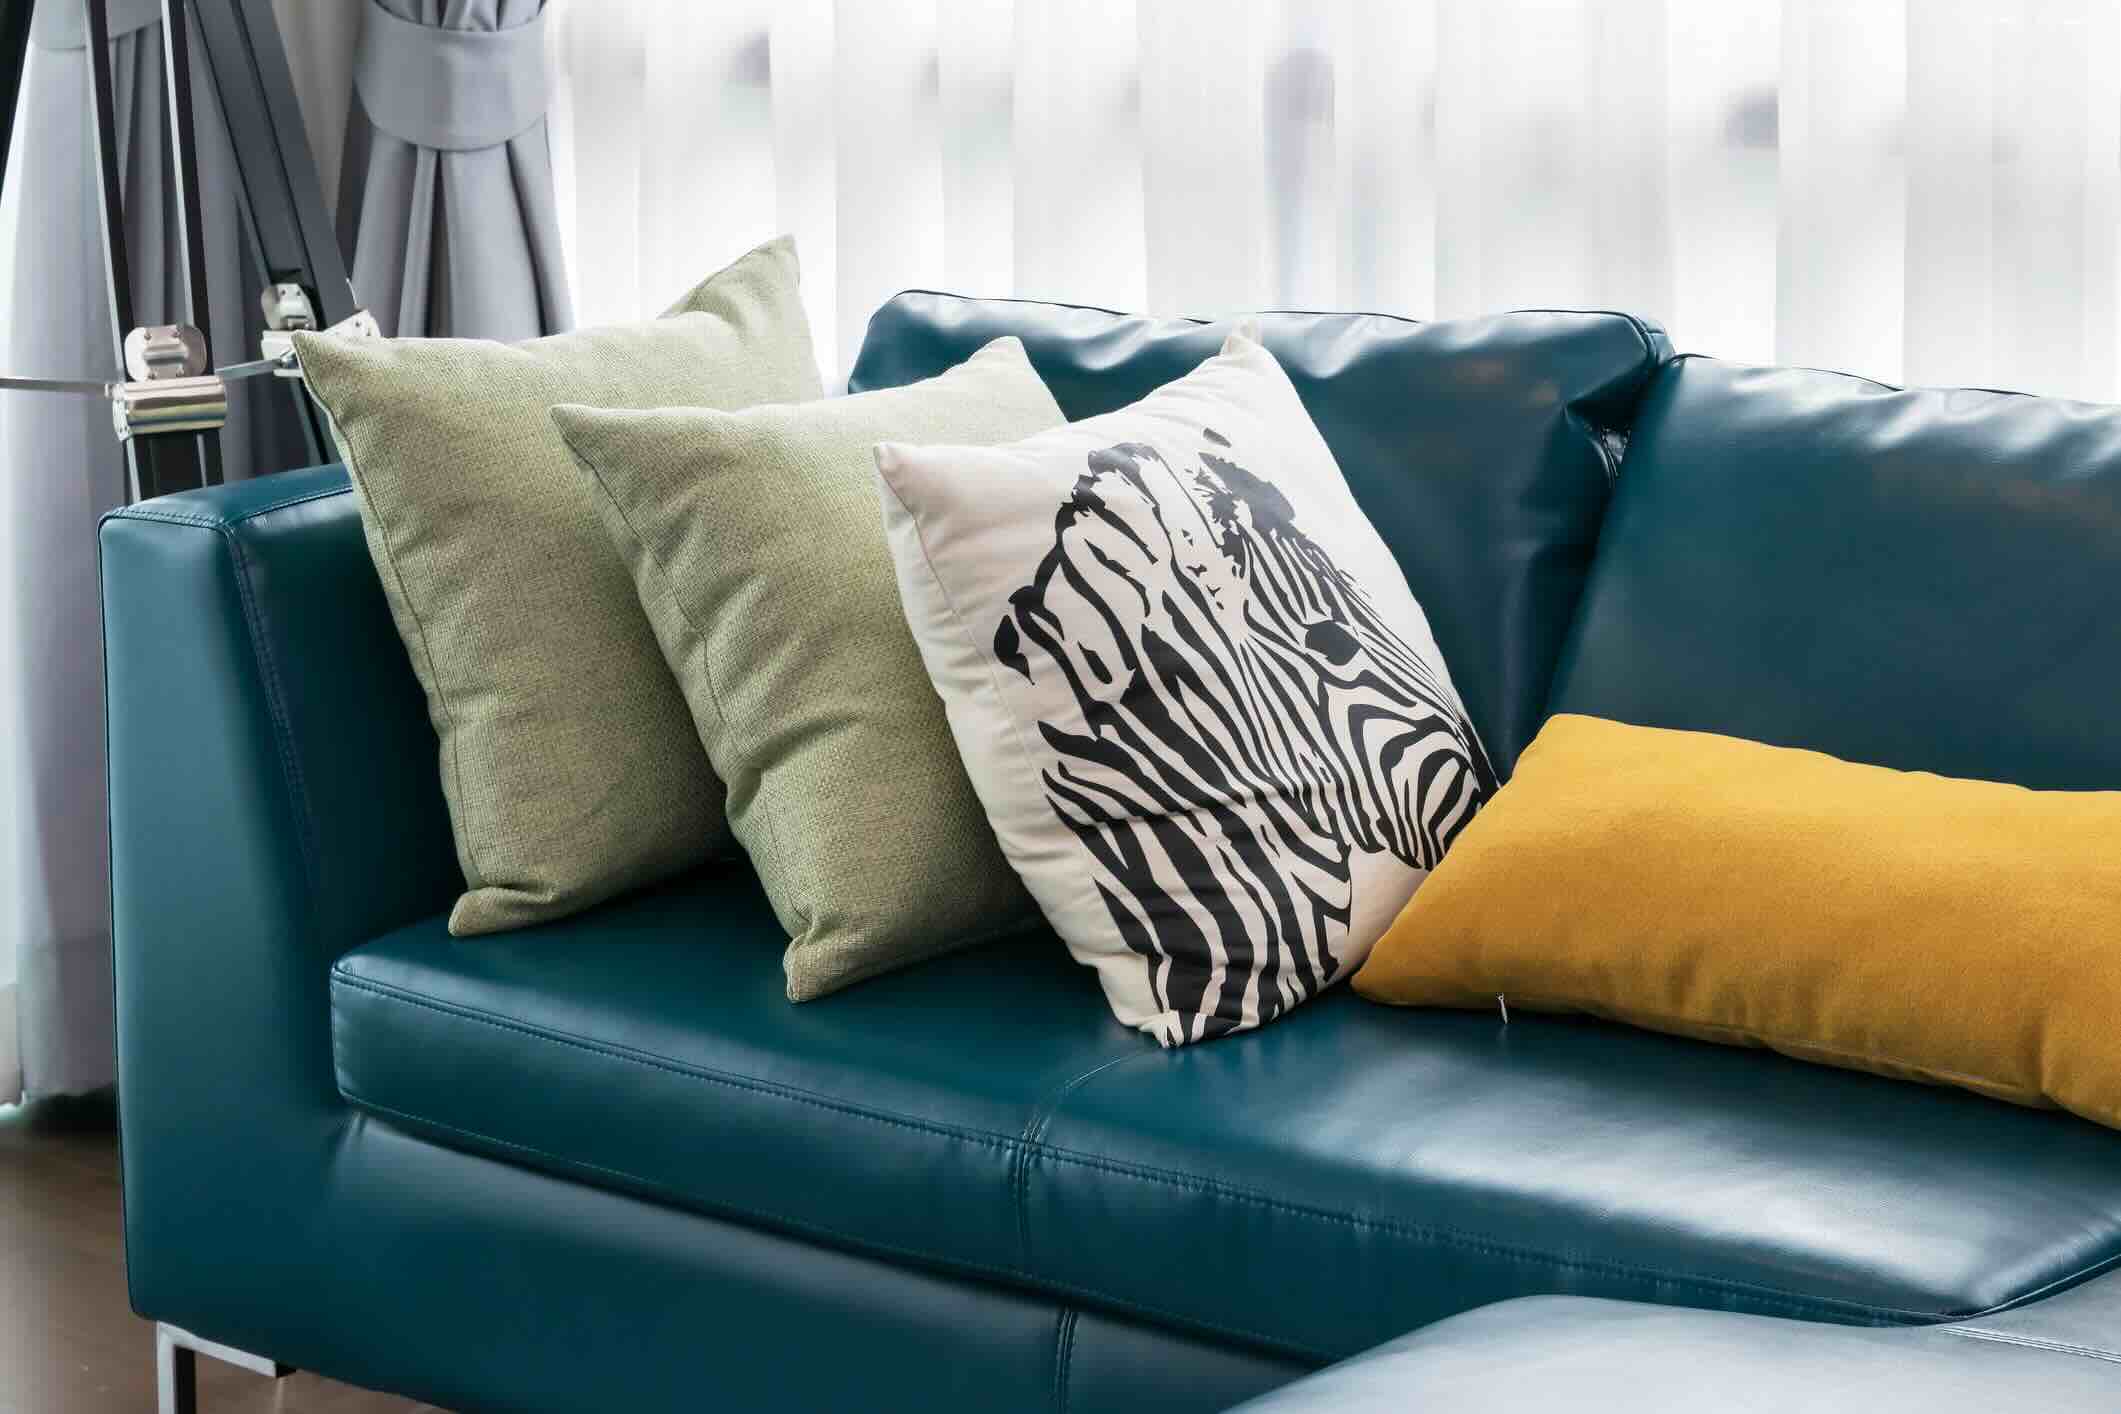 How To Make Your Couch Cushions Stay In Place